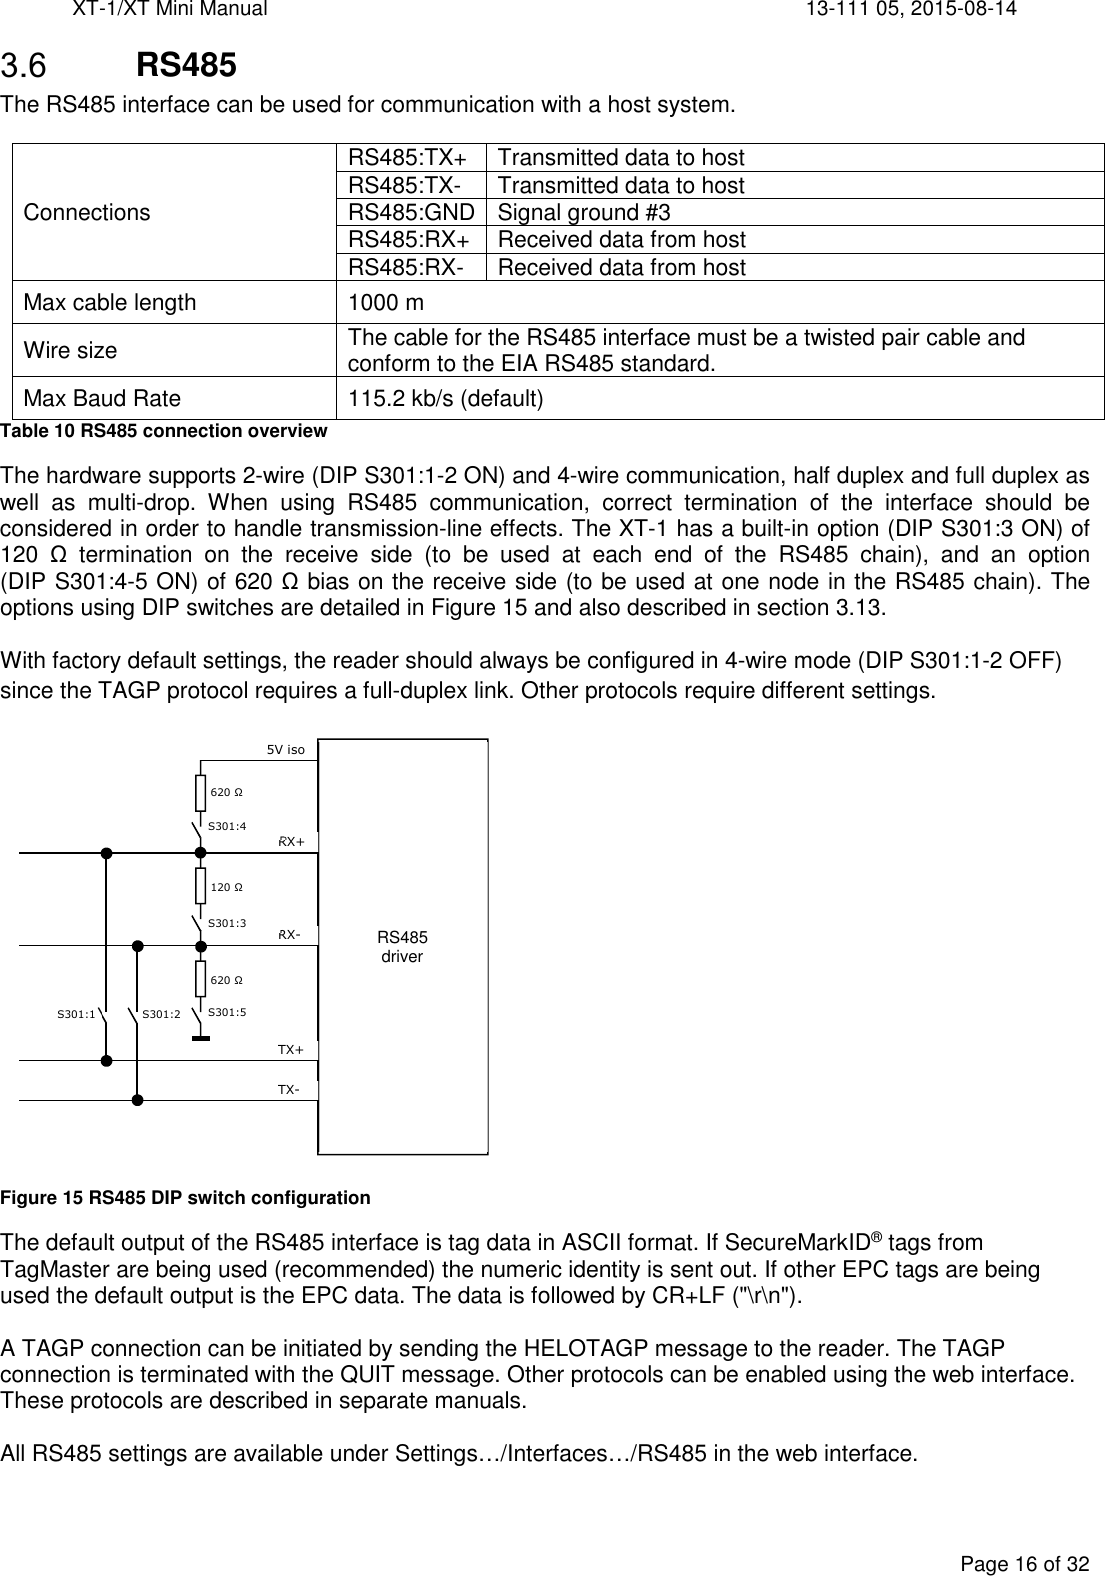 XT-1/XT Mini Manual     13-111 05, 2015-08-14  Page 16 of 32   RS485 The RS485 interface can be used for communication with a host system.  Connections RS485:TX+  Transmitted data to host RS485:TX-  Transmitted data to host RS485:GND Signal ground #3 RS485:RX+  Received data from host RS485:RX-  Received data from host Max cable length  1000 m Wire size  The cable for the RS485 interface must be a twisted pair cable and conform to the EIA RS485 standard. Max Baud Rate  115.2 kb/s (default) Table 10 RS485 connection overview The hardware supports 2-wire (DIP S301:1-2 ON) and 4-wire communication, half duplex and full duplex as well  as  multi-drop.  When  using  RS485  communication,  correct  termination  of  the  interface  should  be considered in order to handle transmission-line effects. The XT-1 has a built-in option (DIP S301:3 ON) of 120  Ω  termination  on  the  receive  side  (to  be  used  at  each  end  of  the  RS485  chain),  and  an  option (DIP S301:4-5 ON) of 620 Ω bias on the receive side (to be used at one node in the RS485 chain). The options using DIP switches are detailed in Figure 15 and also described in section 3.13.  With factory default settings, the reader should always be configured in 4-wire mode (DIP S301:1-2 OFF) since the TAGP protocol requires a full-duplex link. Other protocols require different settings.  Figure 15 RS485 DIP switch configuration The default output of the RS485 interface is tag data in ASCII format. If SecureMarkID® tags from TagMaster are being used (recommended) the numeric identity is sent out. If other EPC tags are being used the default output is the EPC data. The data is followed by CR+LF (&quot;\r\n&quot;).  A TAGP connection can be initiated by sending the HELOTAGP message to the reader. The TAGP connection is terminated with the QUIT message. Other protocols can be enabled using the web interface. These protocols are described in separate manuals.  All RS485 settings are available under Settings…/Interfaces…/RS485 in the web interface. RS485  driver    RX+ RX- TX- TX+ S301:1 S301:2 S301:5 S301:3 S301:4 5V iso 120 Ω 620 Ω 620 Ω 